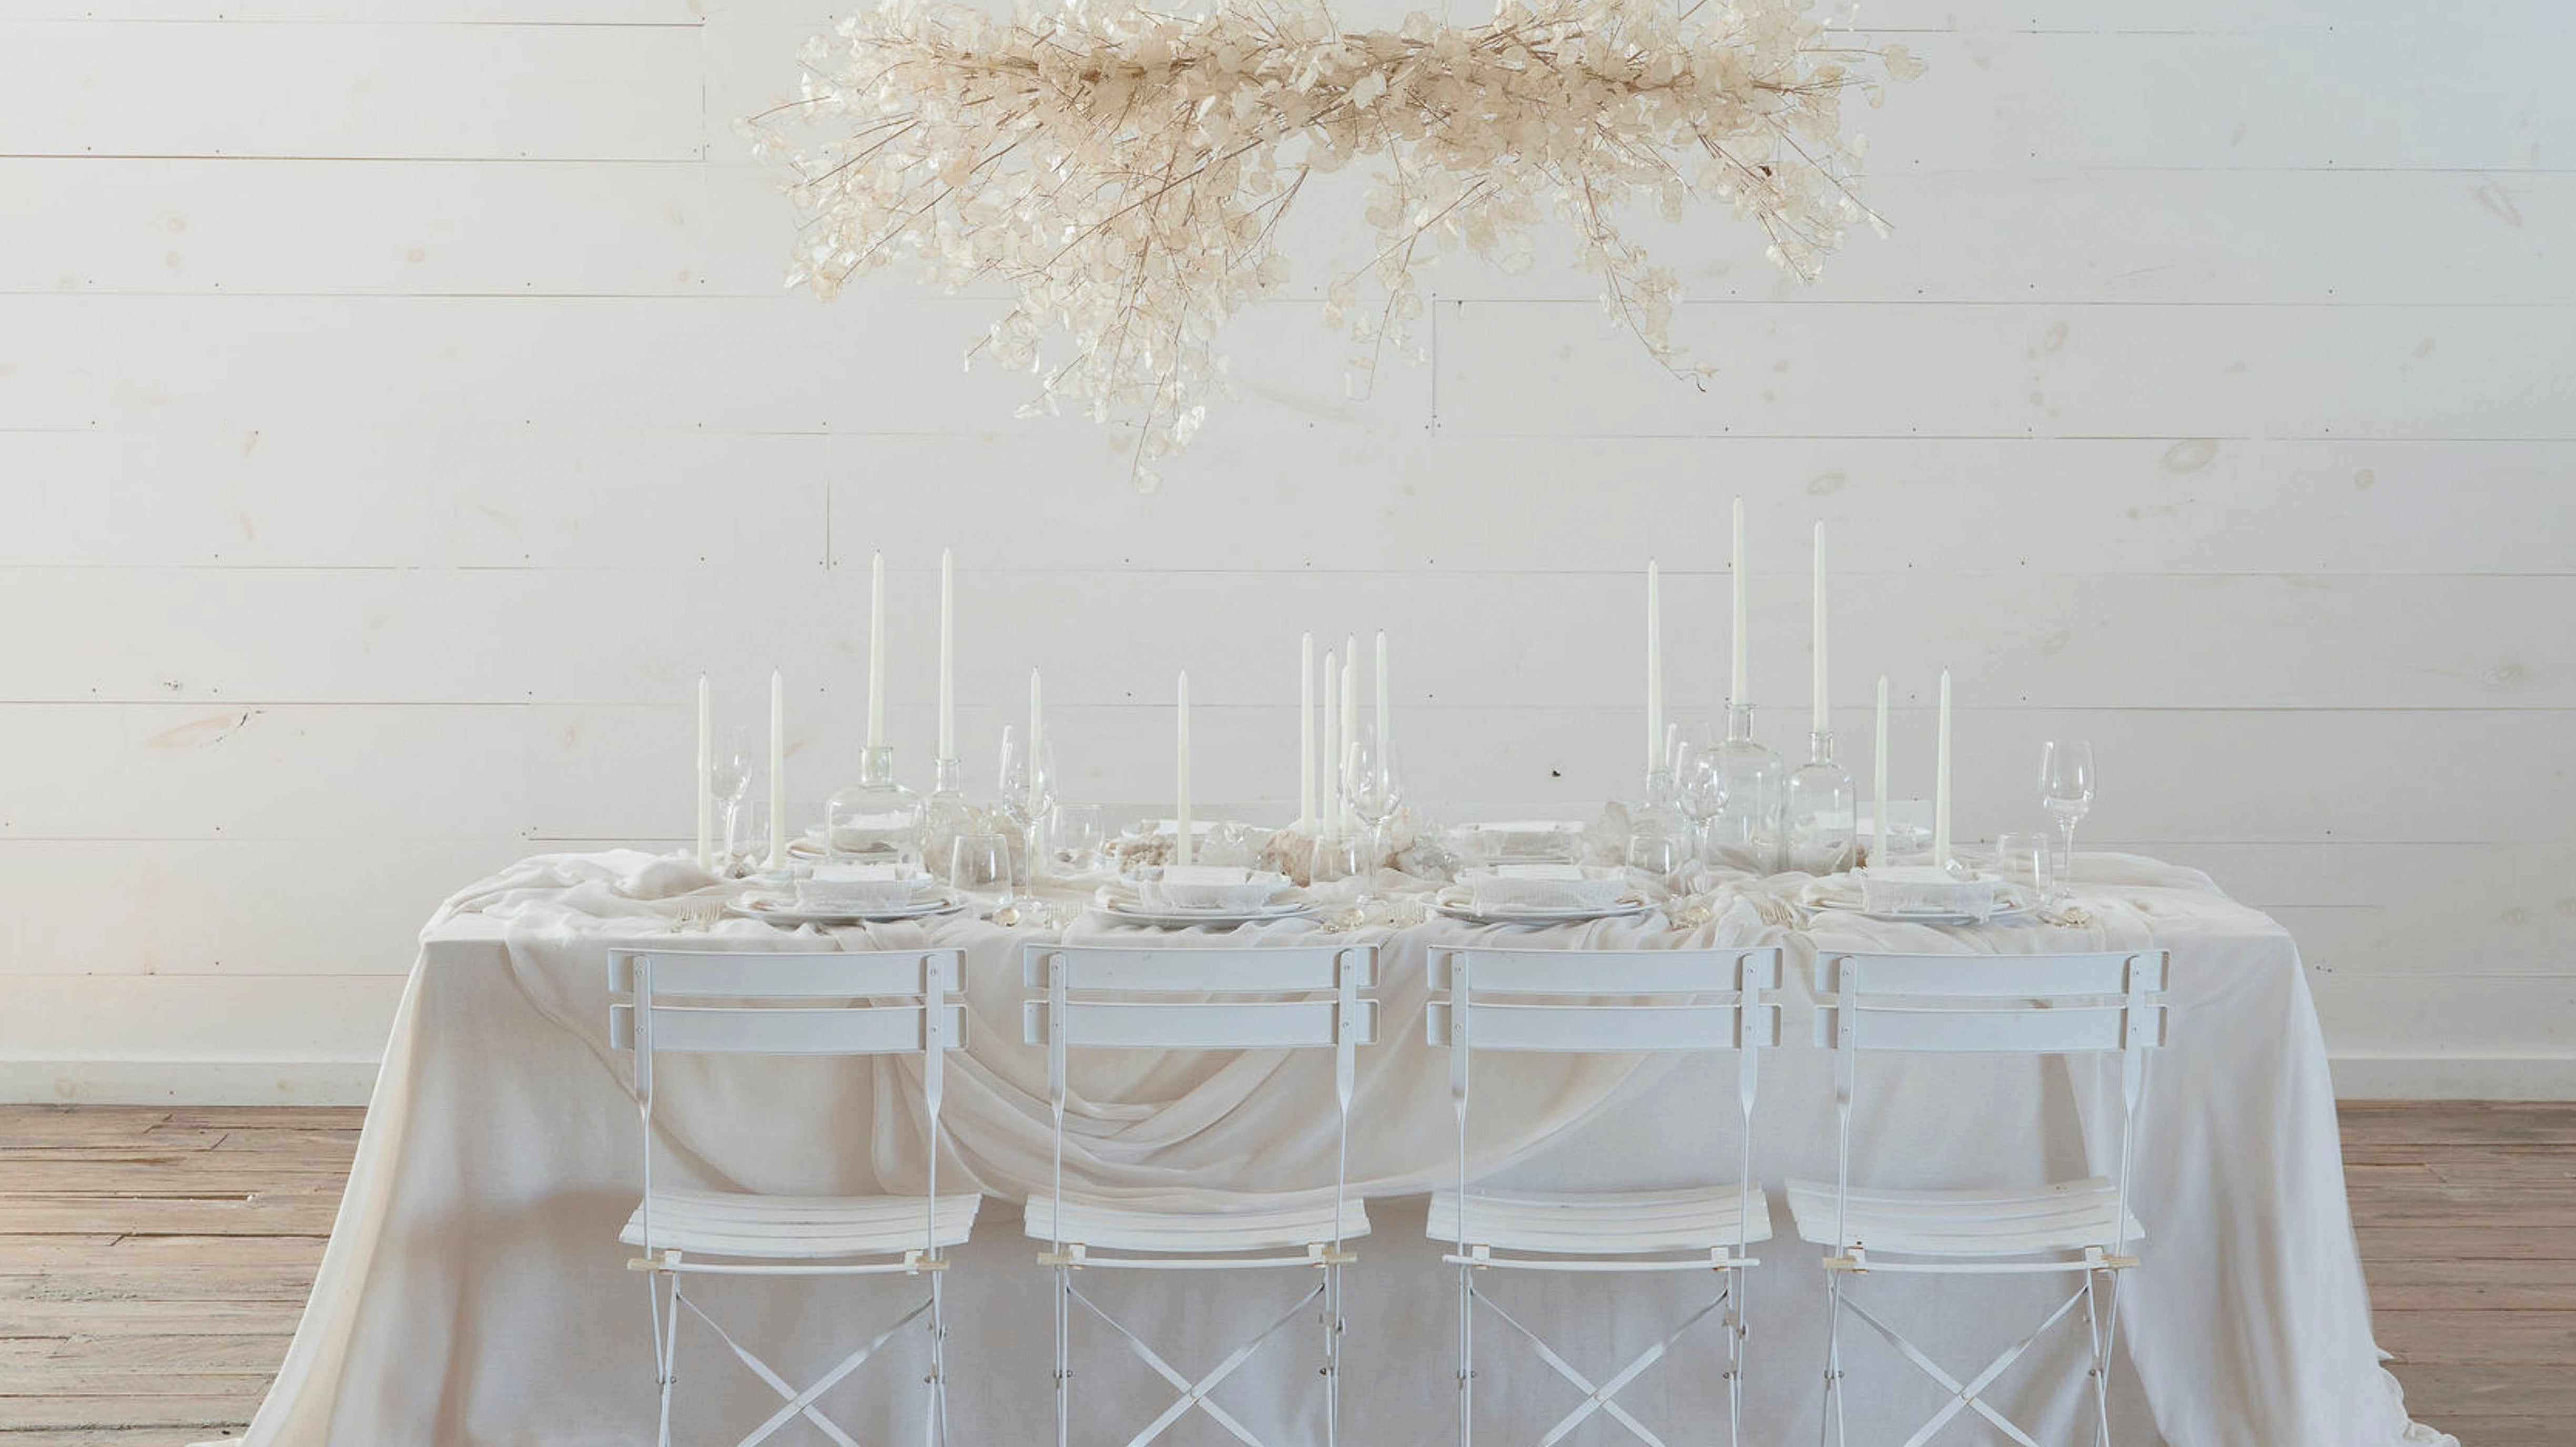 How to select table linens and style your tablescape